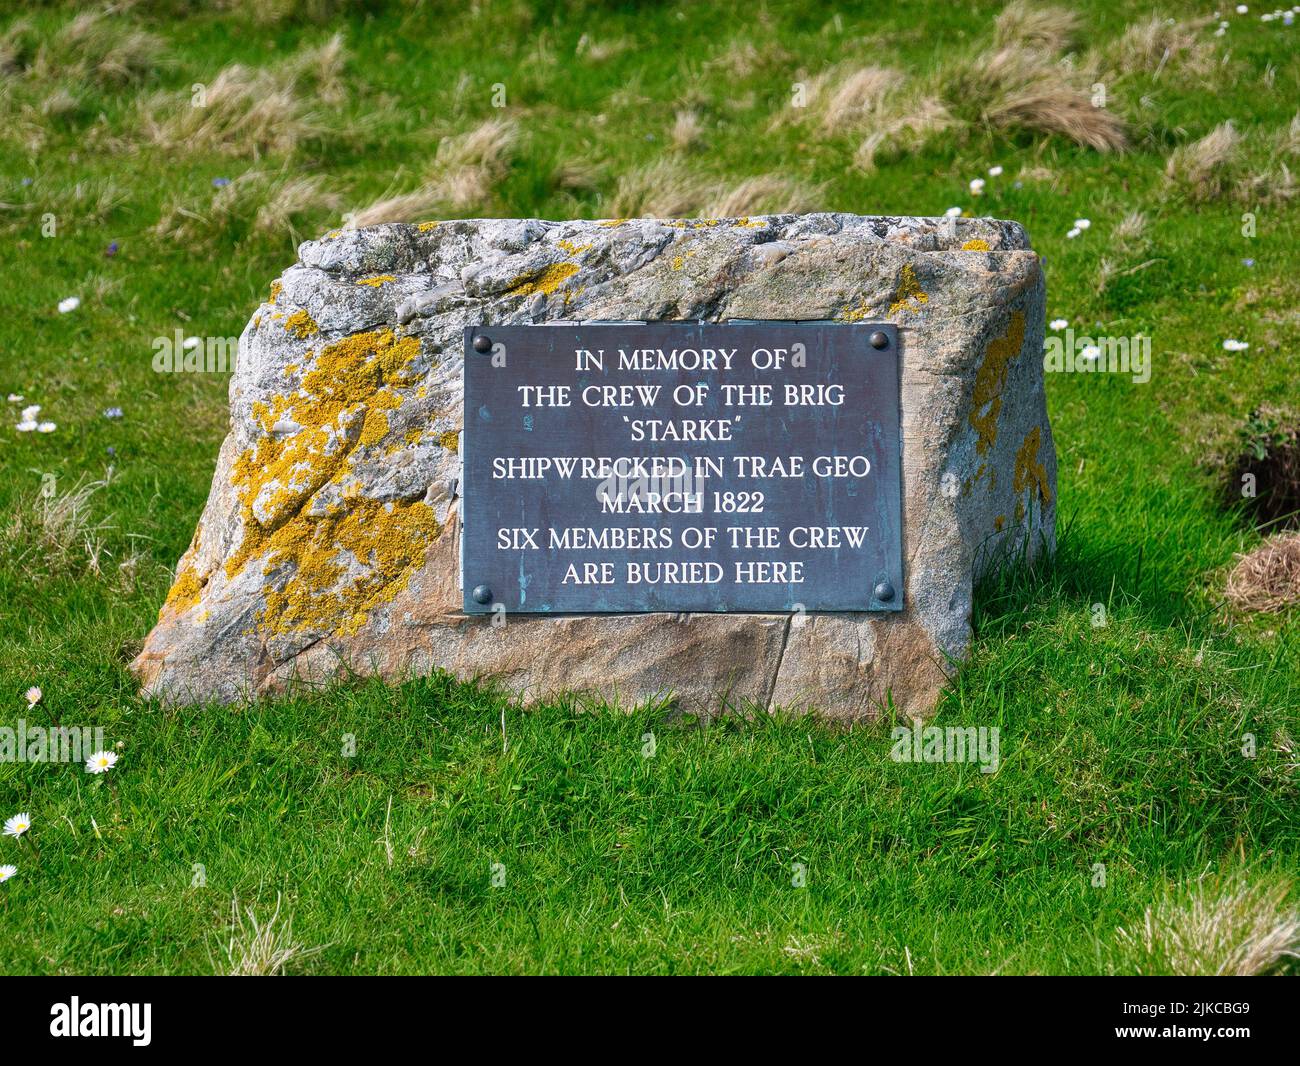 A rectangular plaque attached to a rock marks the graves of six of the crew who died when the brig Starke was shipwrecked near by in 1822. Stock Photo